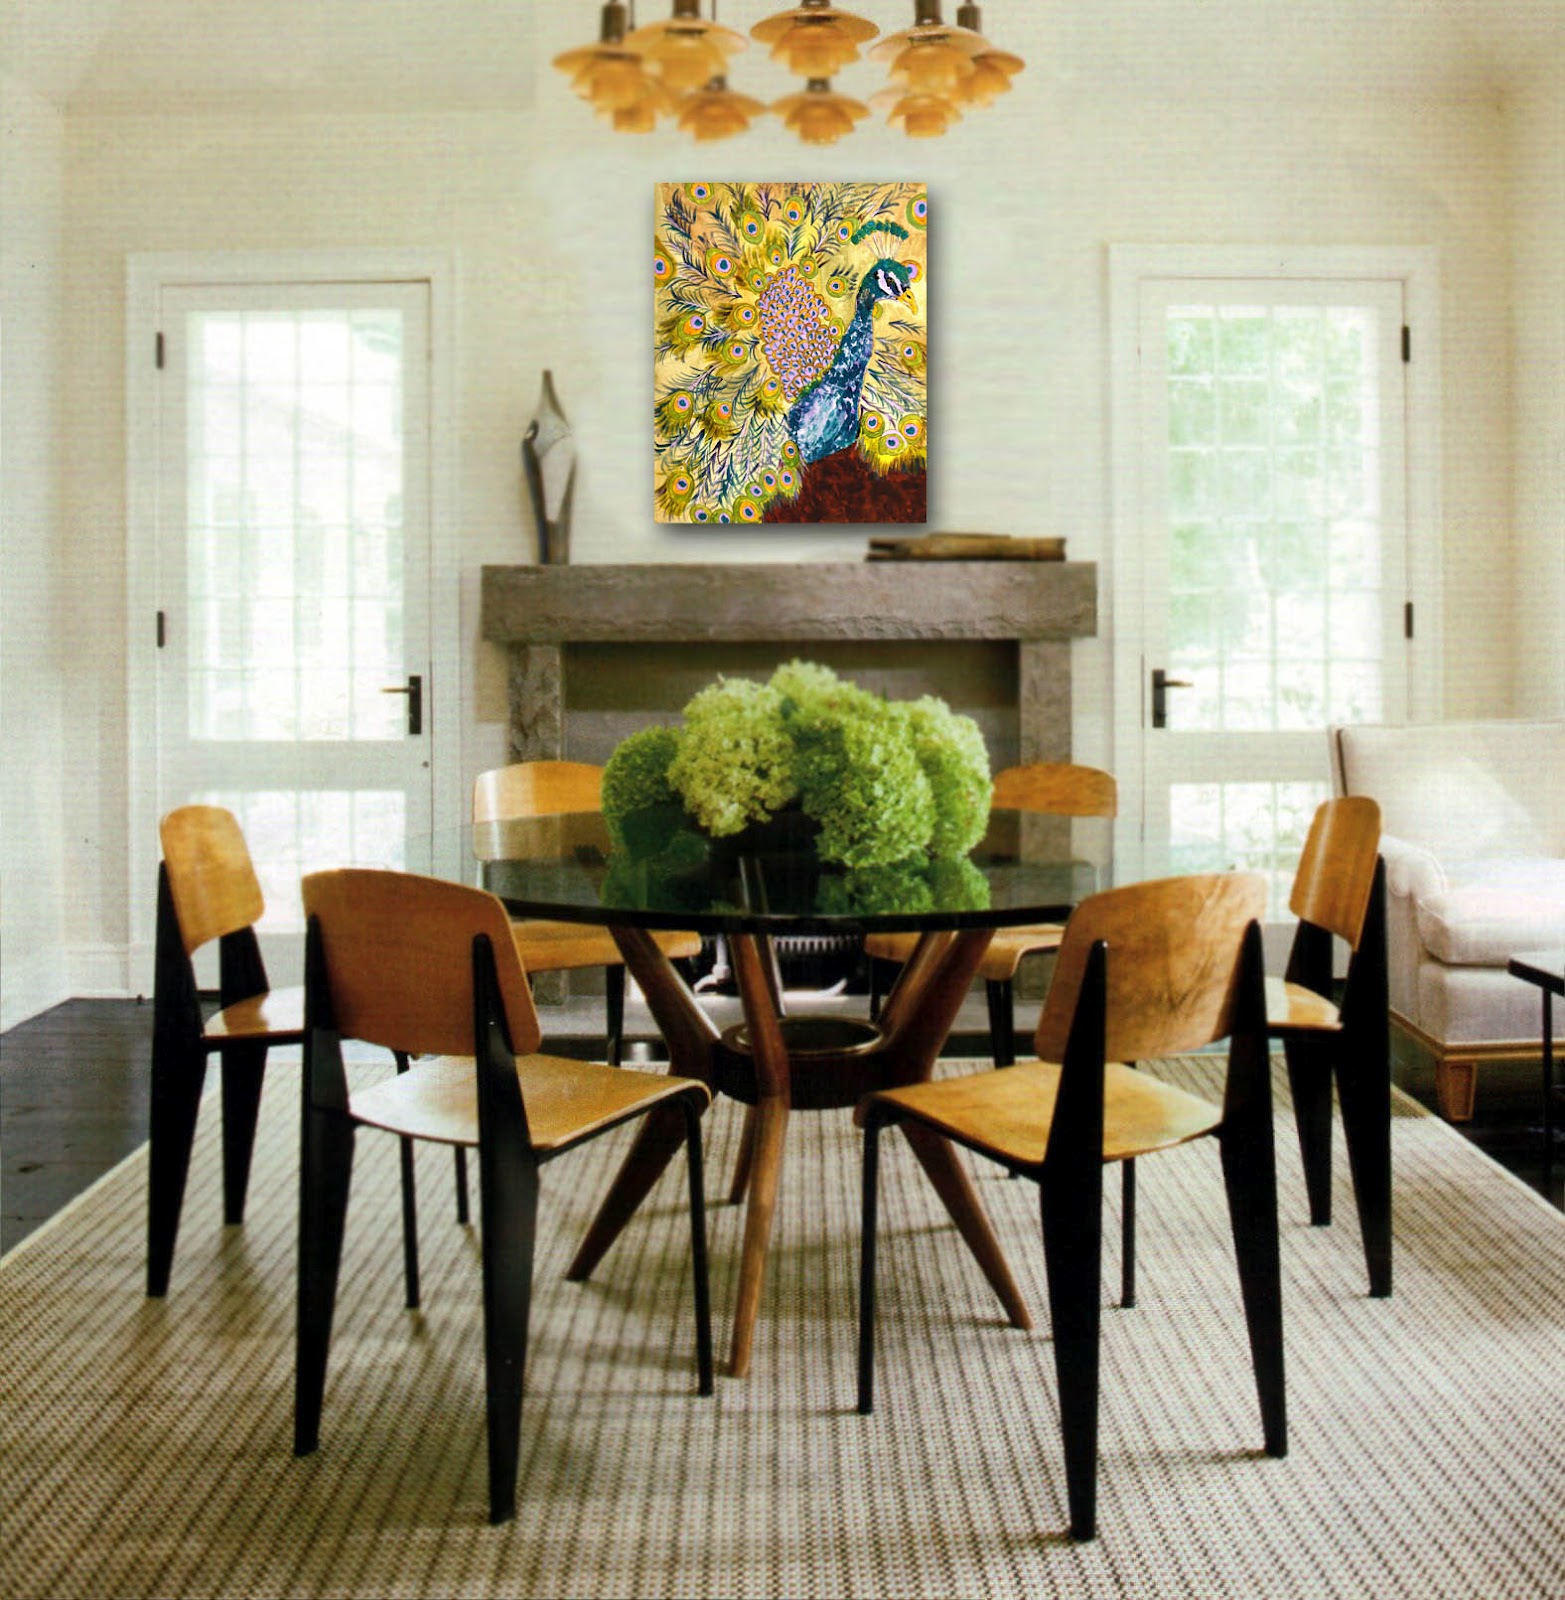 Decorating Ideas For A Formal Dining Room Table